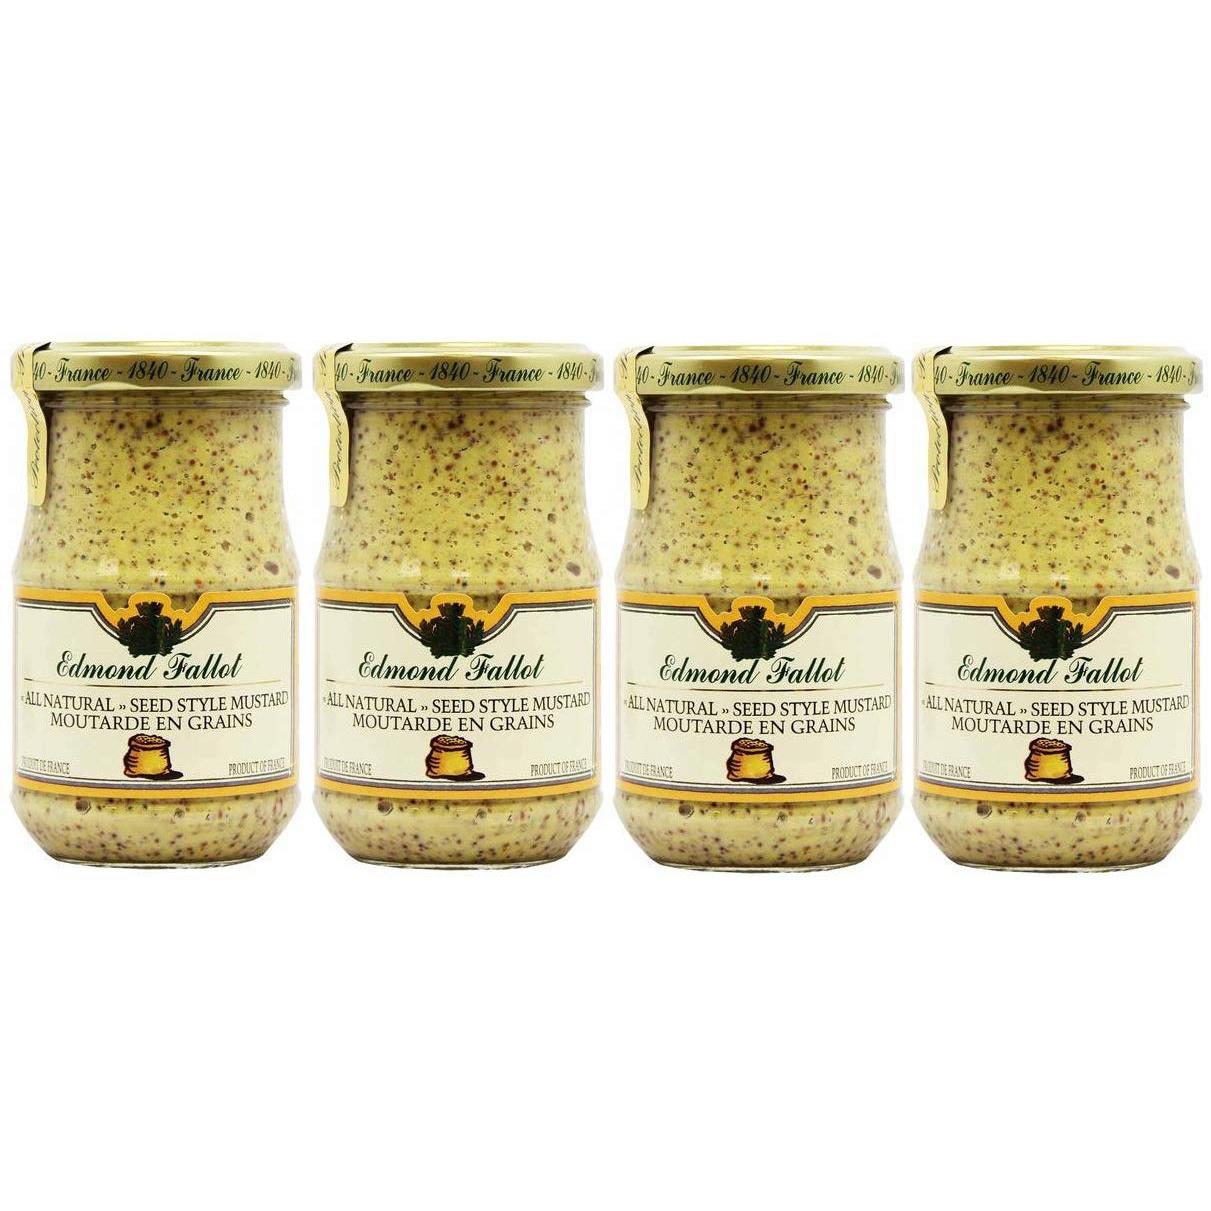 Edmond Fallot Mustard 4 Pack of All Natural Seed Style (7 Ounces per Bottle)